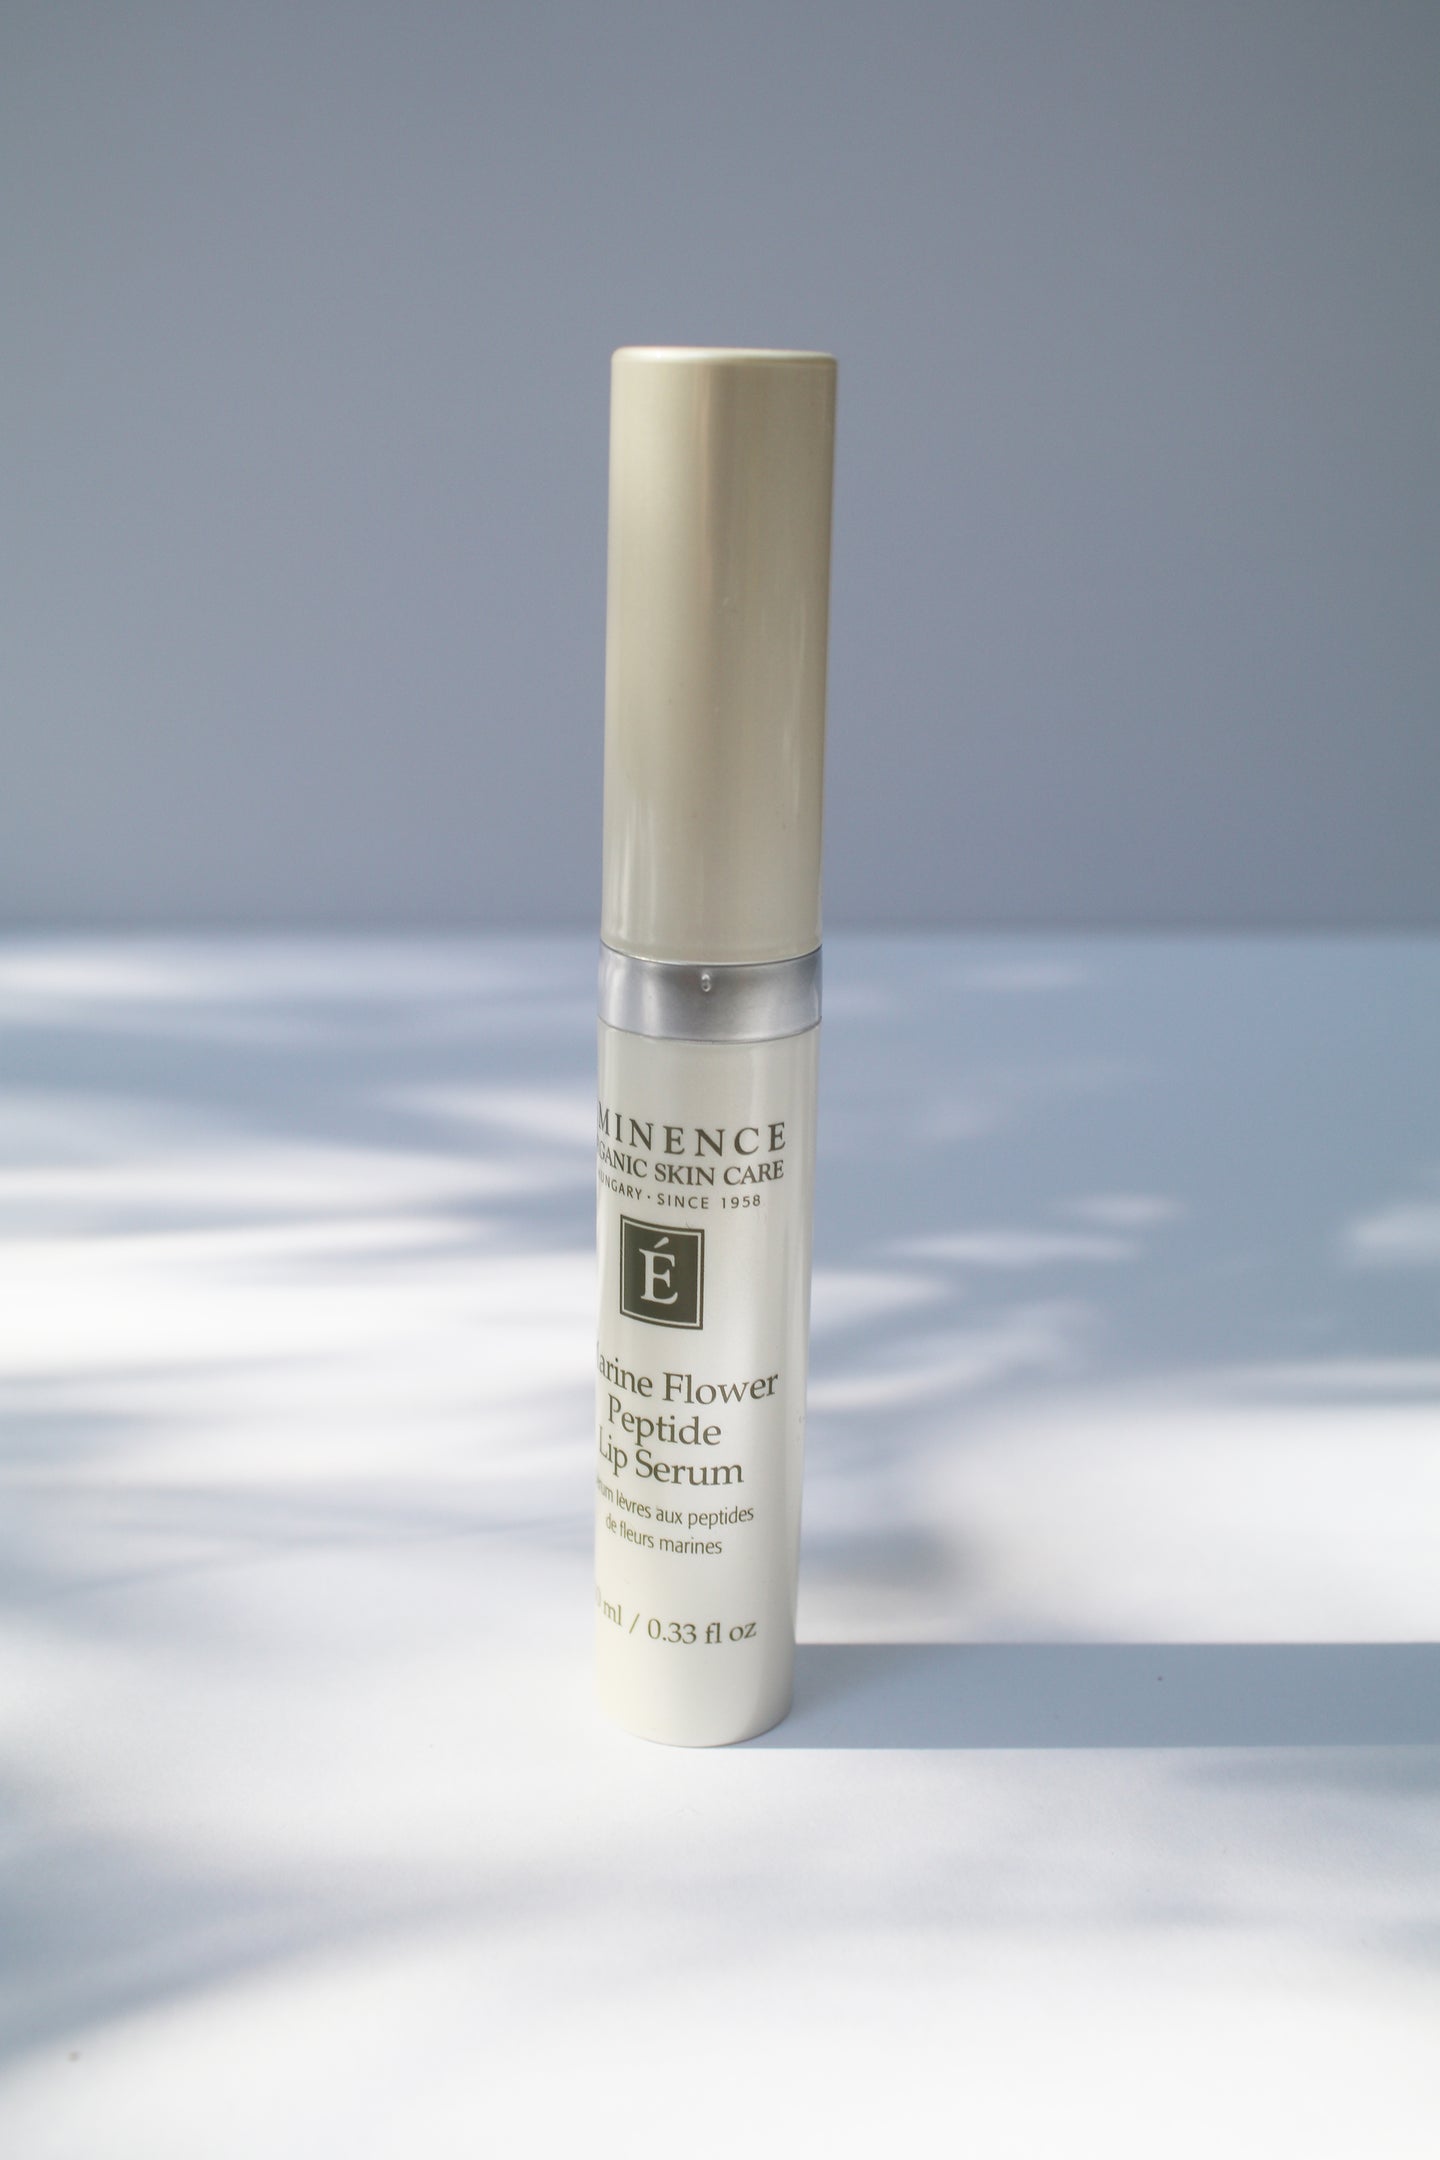 a container of marine flower peptide lip serum by Eminence